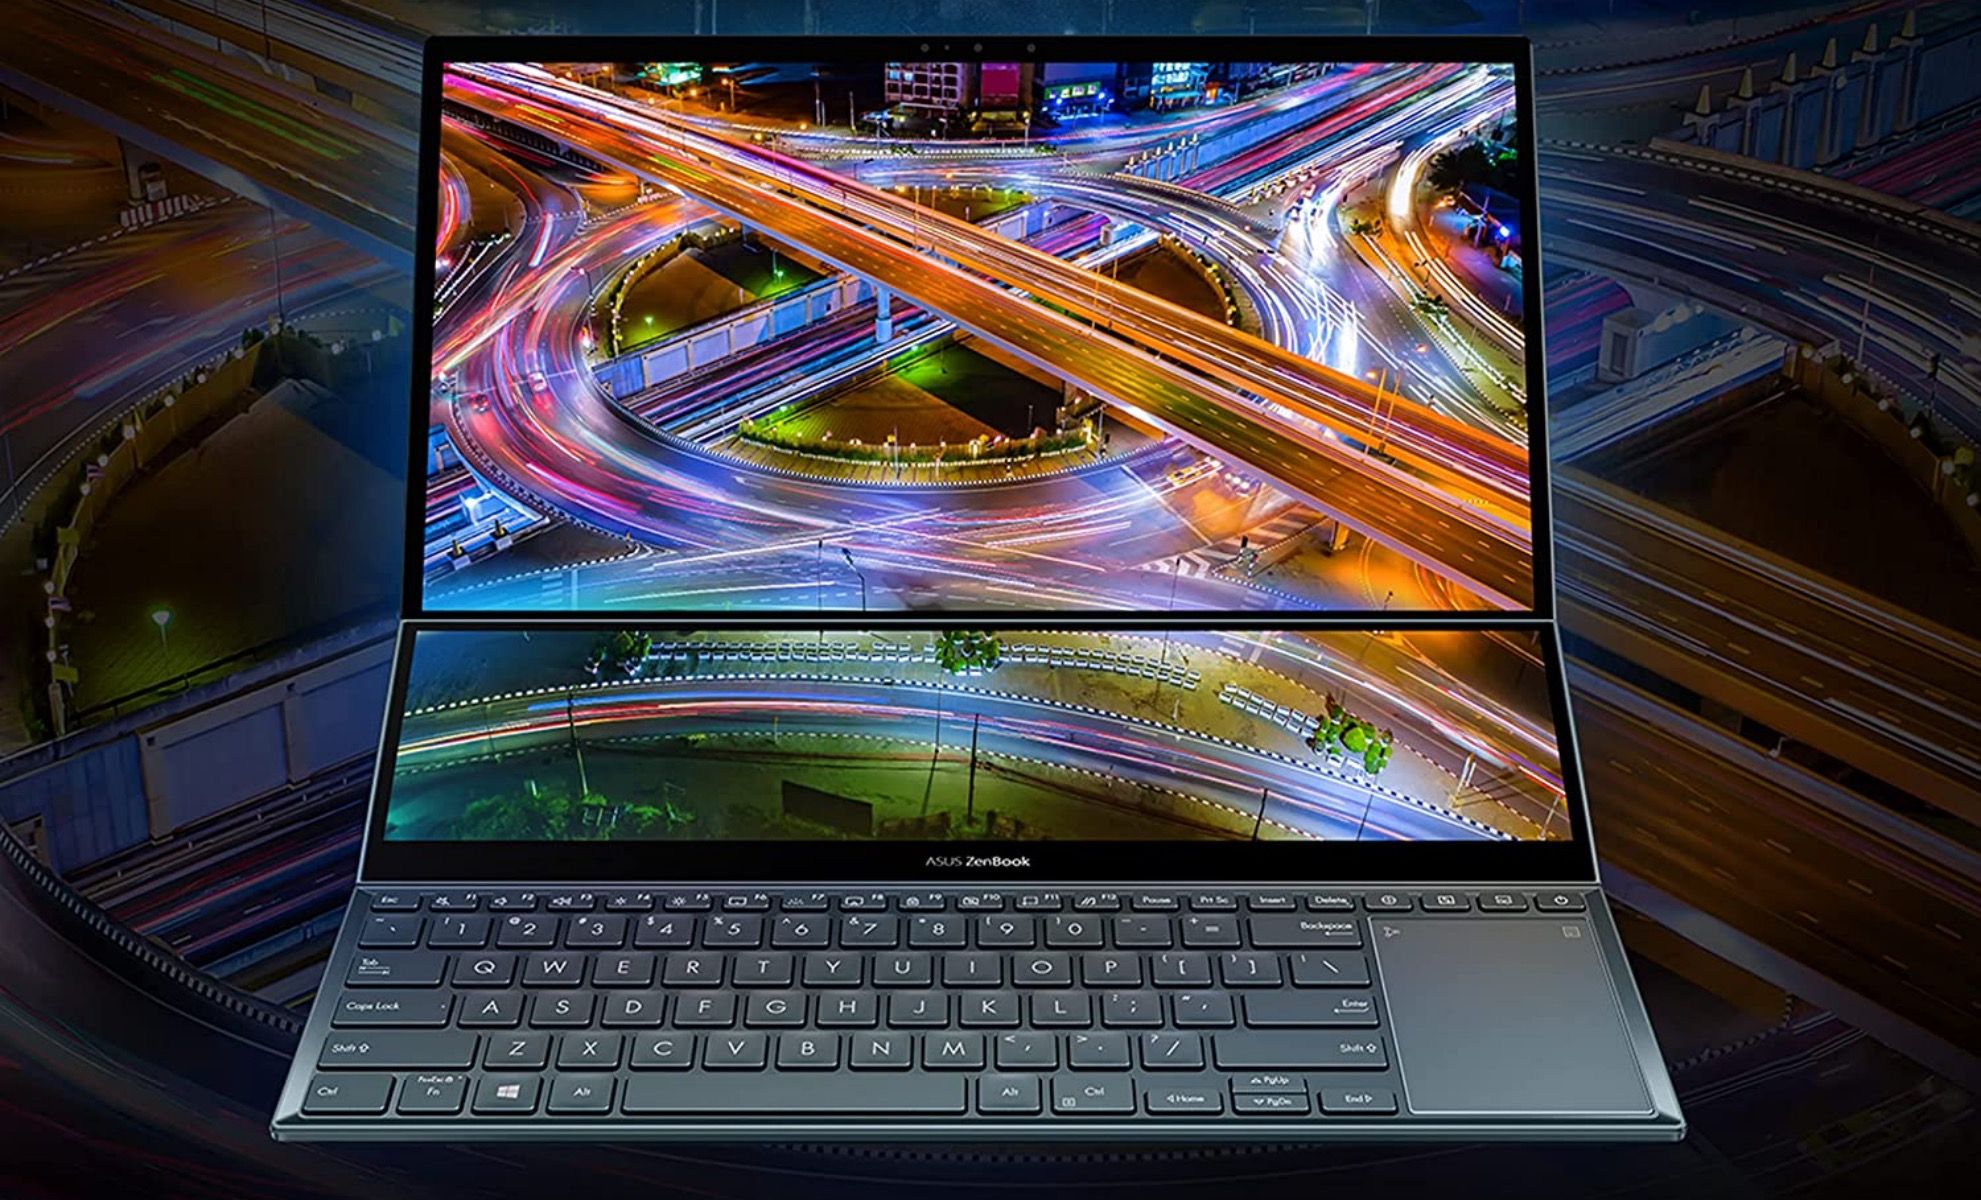 Face shot of the Asus ZenBook Pro Duo 15 Immersive display including the ScreenPad